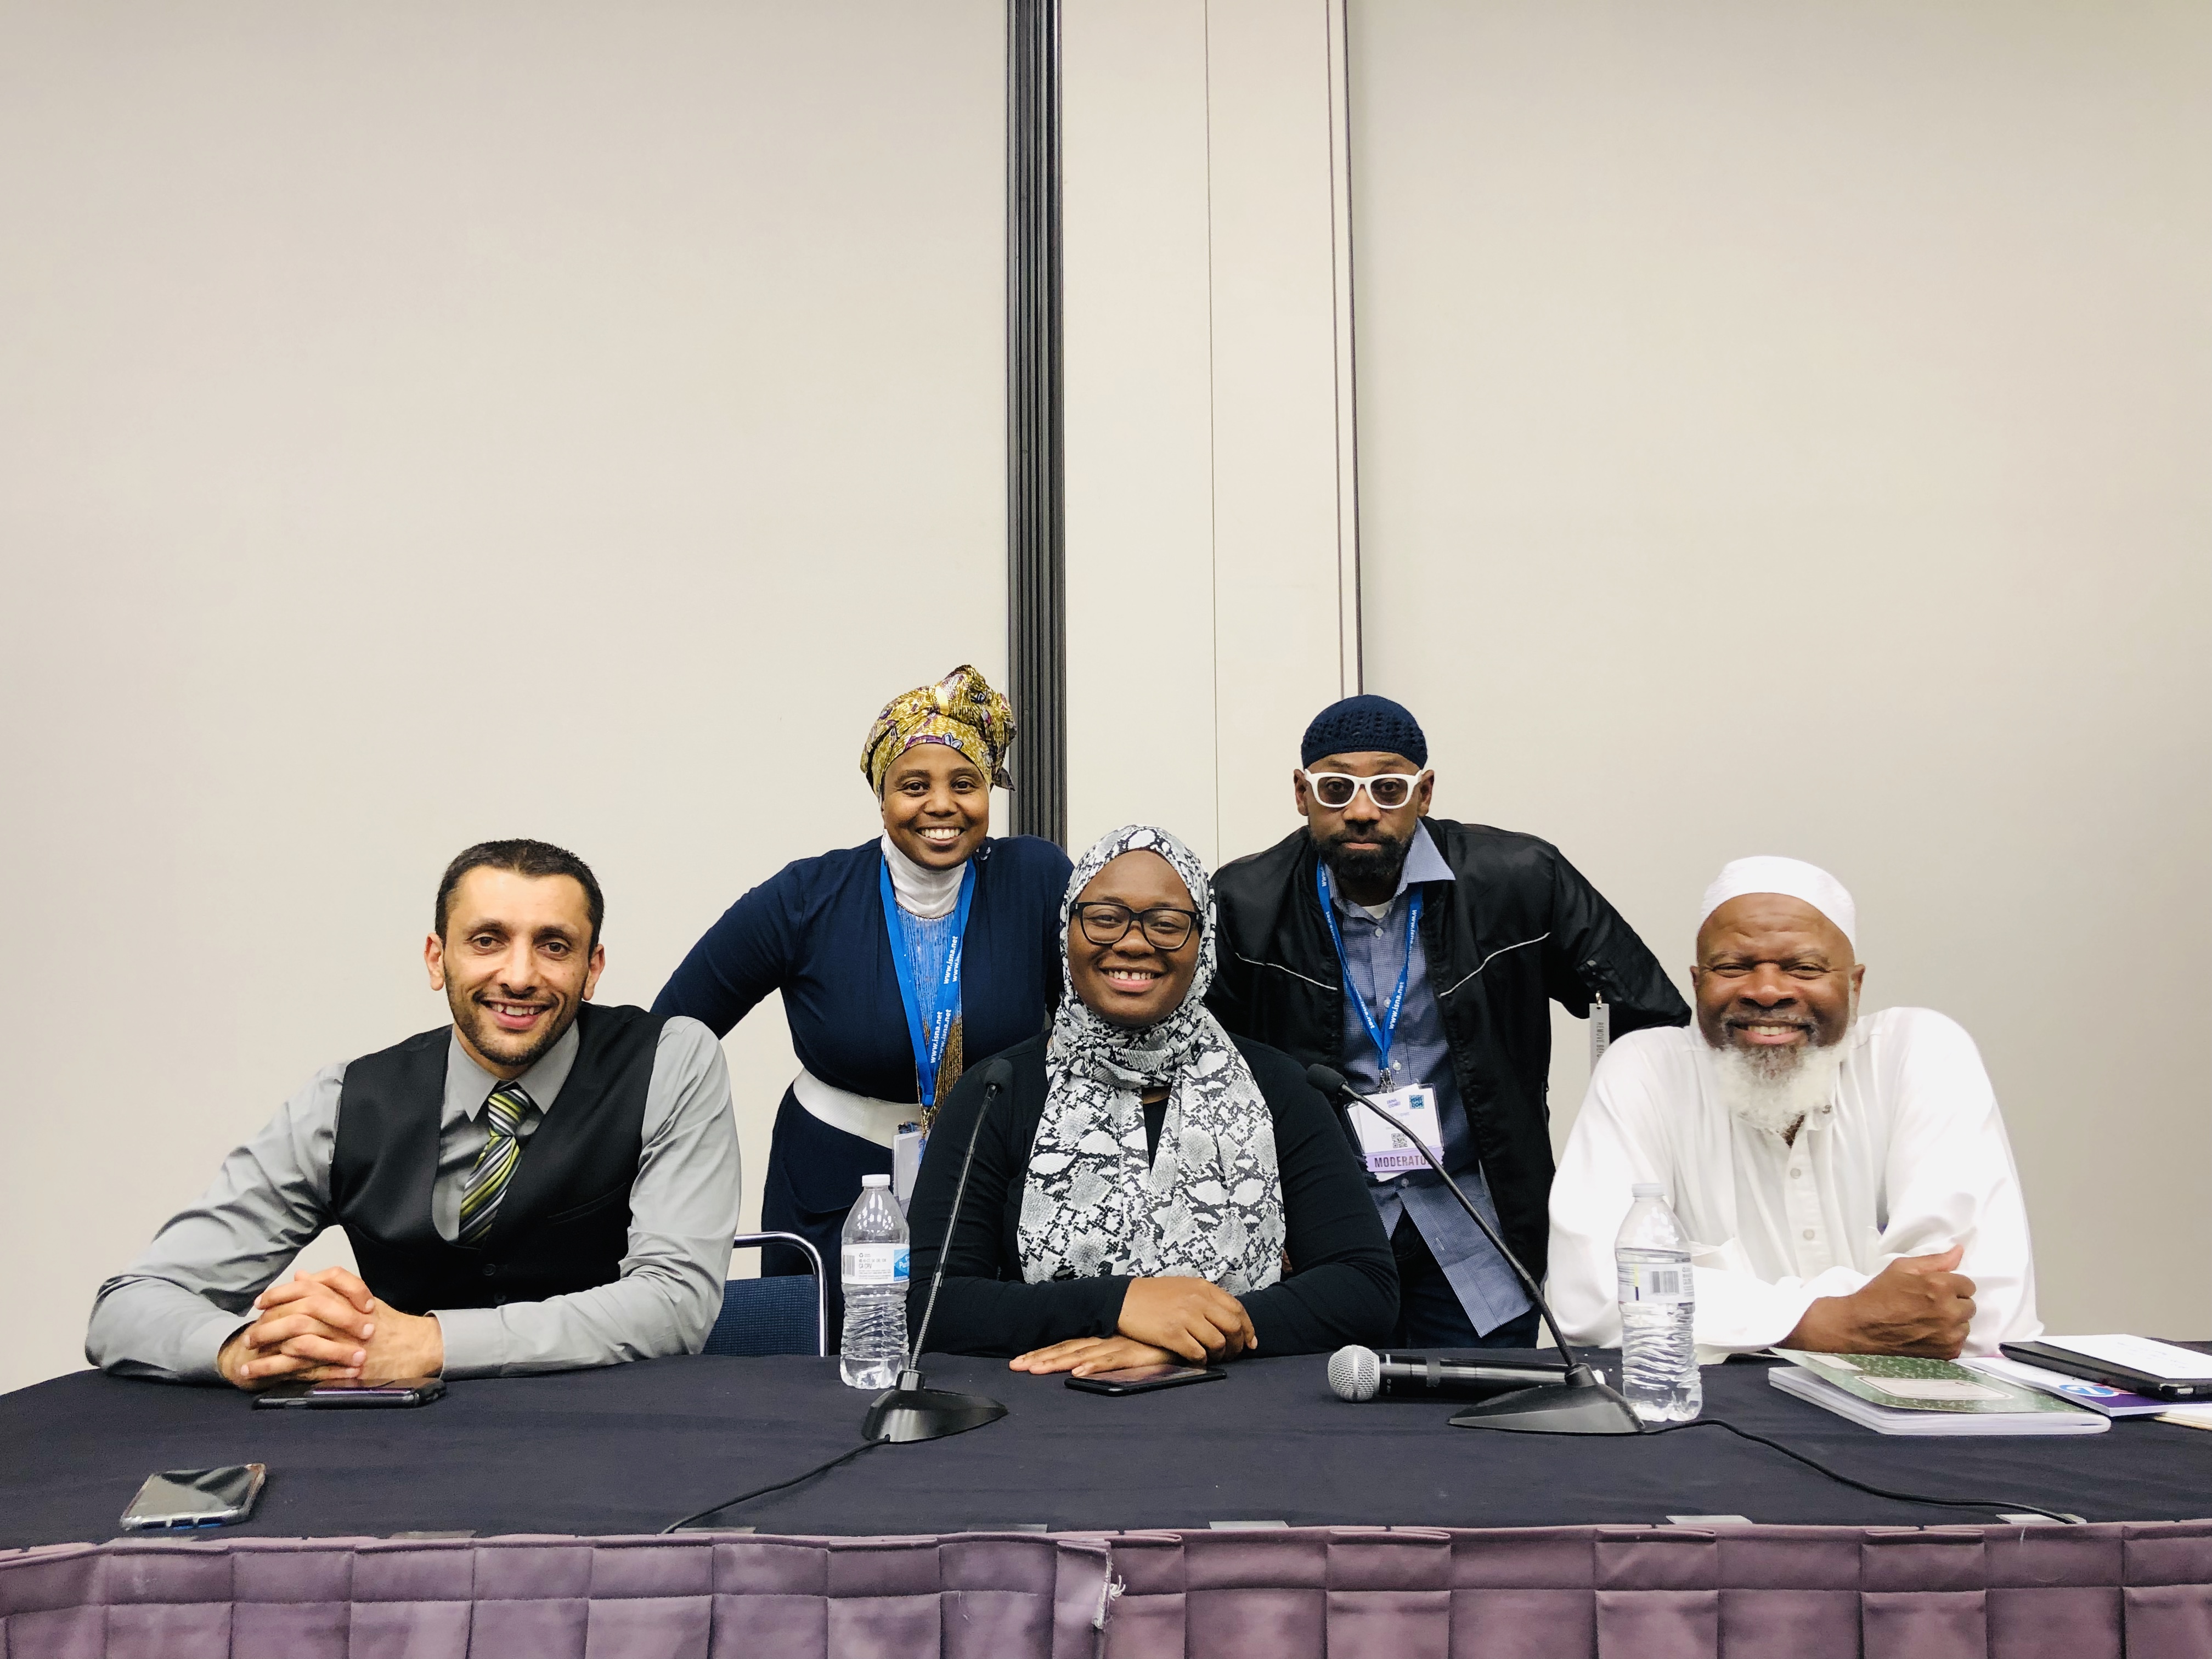 All Star Marriage Panel Draws Standing Room Only Audience at ISNA